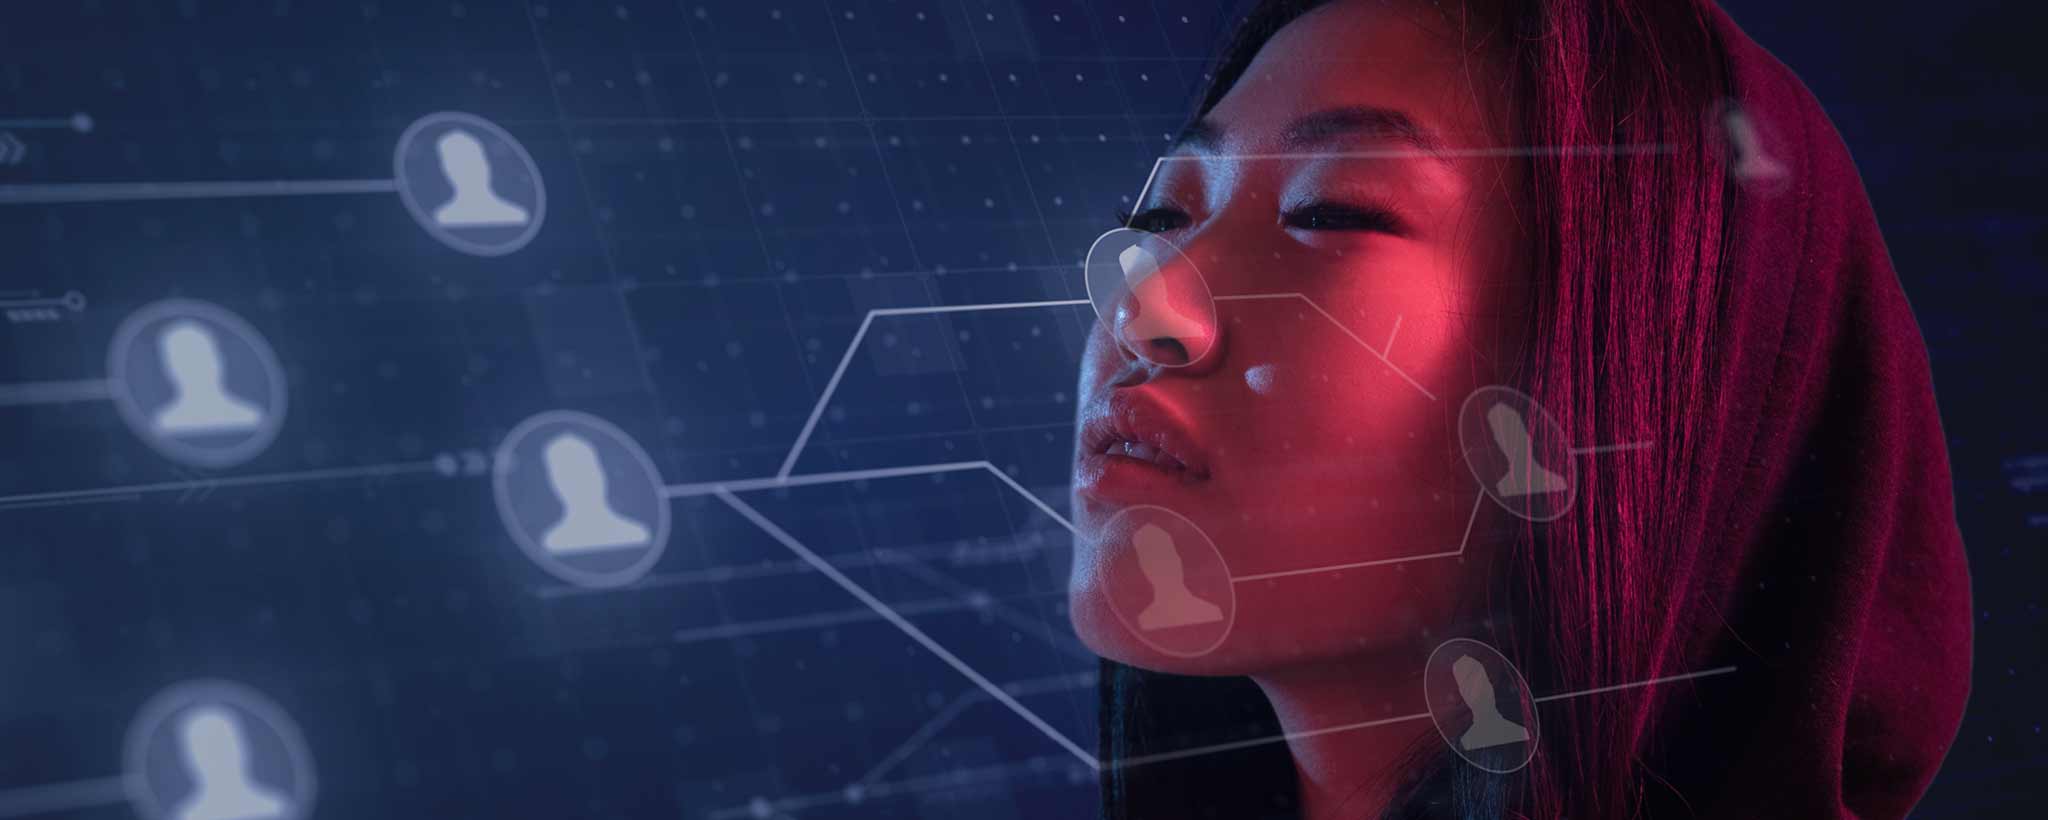 'Asian woman immersed in digital network'